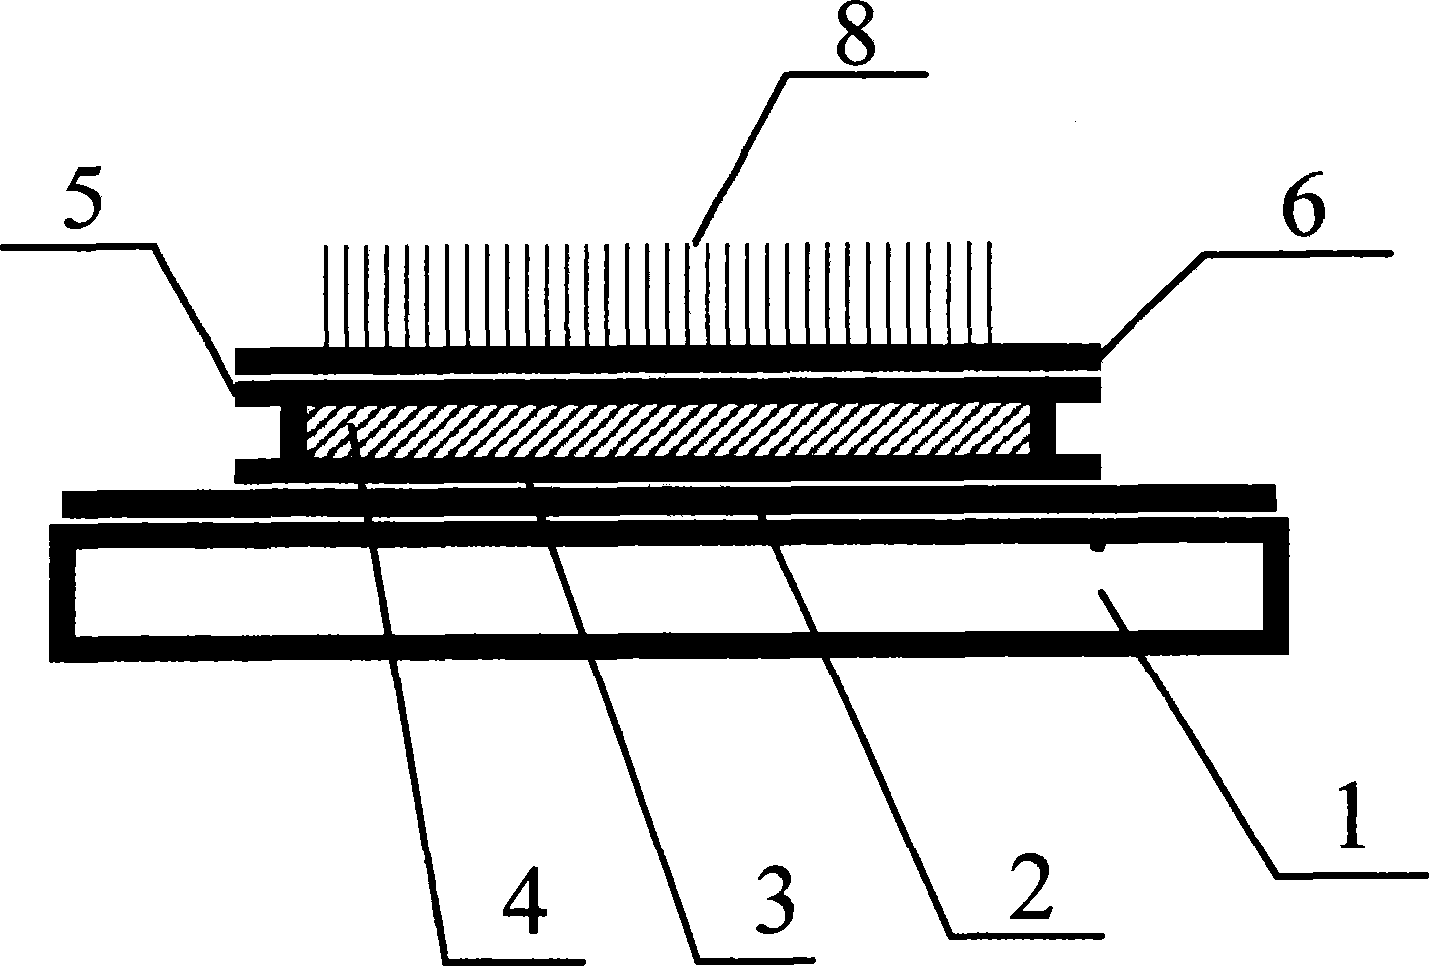 Flat-board display of hollow bottom grid array structure and mfg. technology